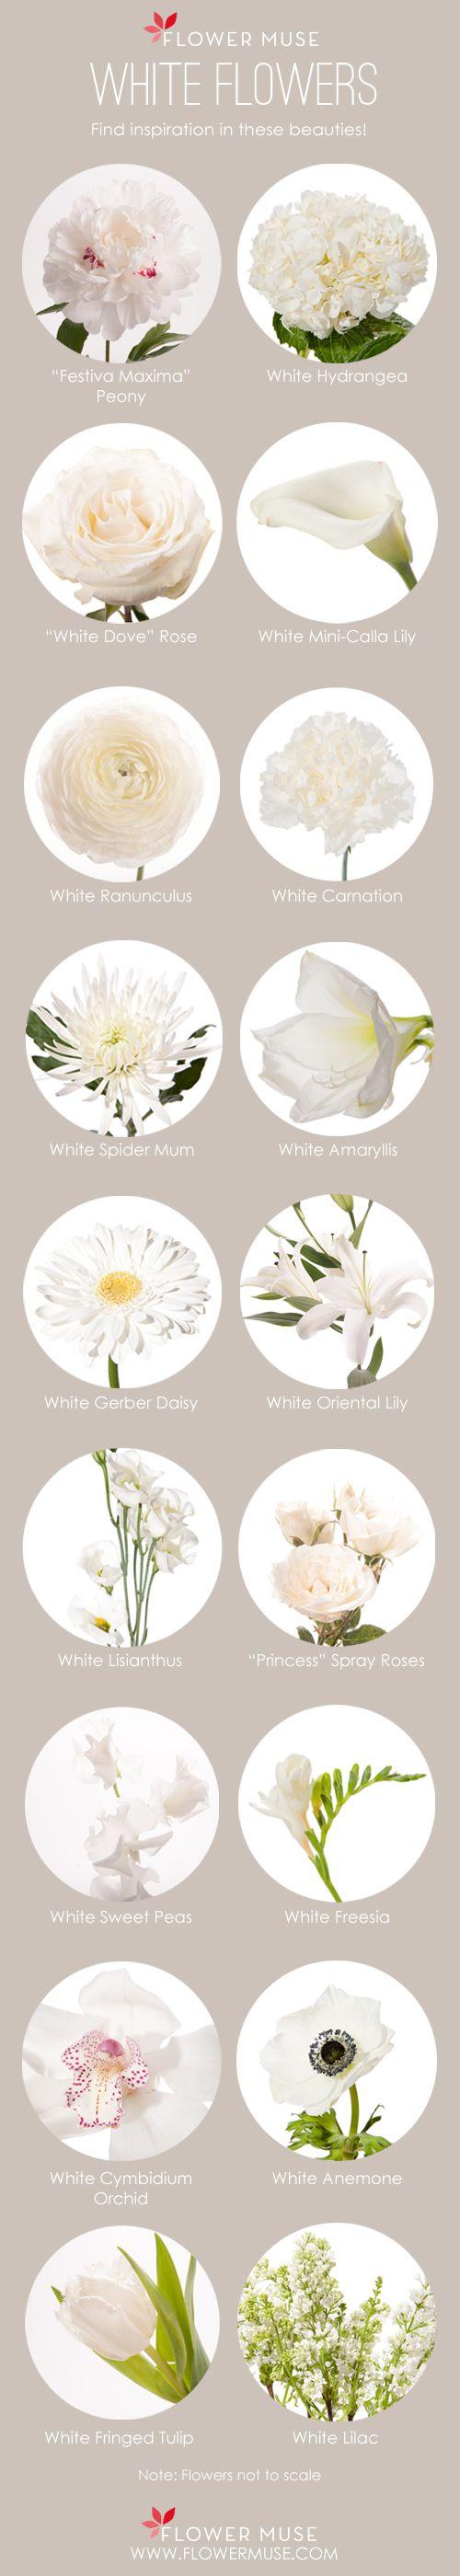 Wedding - Our Favorite: White Flowers - Flower Muse Blog